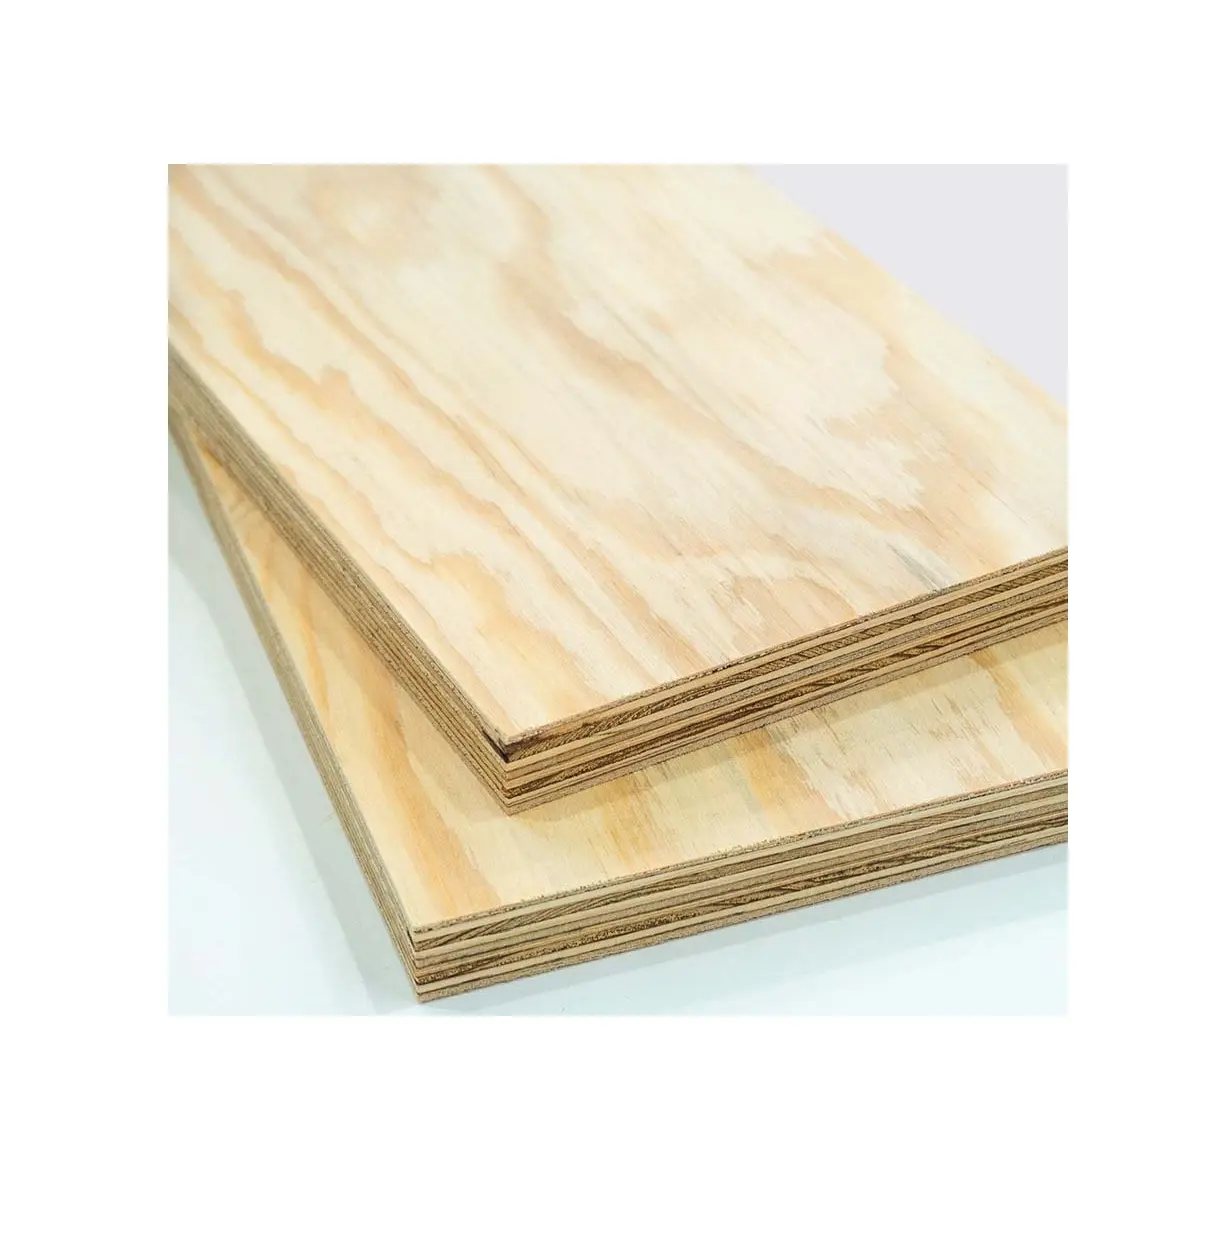 Vietnamese Wholesaler Ready To Export In Bulk 1220x2440mm OEM Solid Pine Wood Pine Finger Joint Board For Furniture